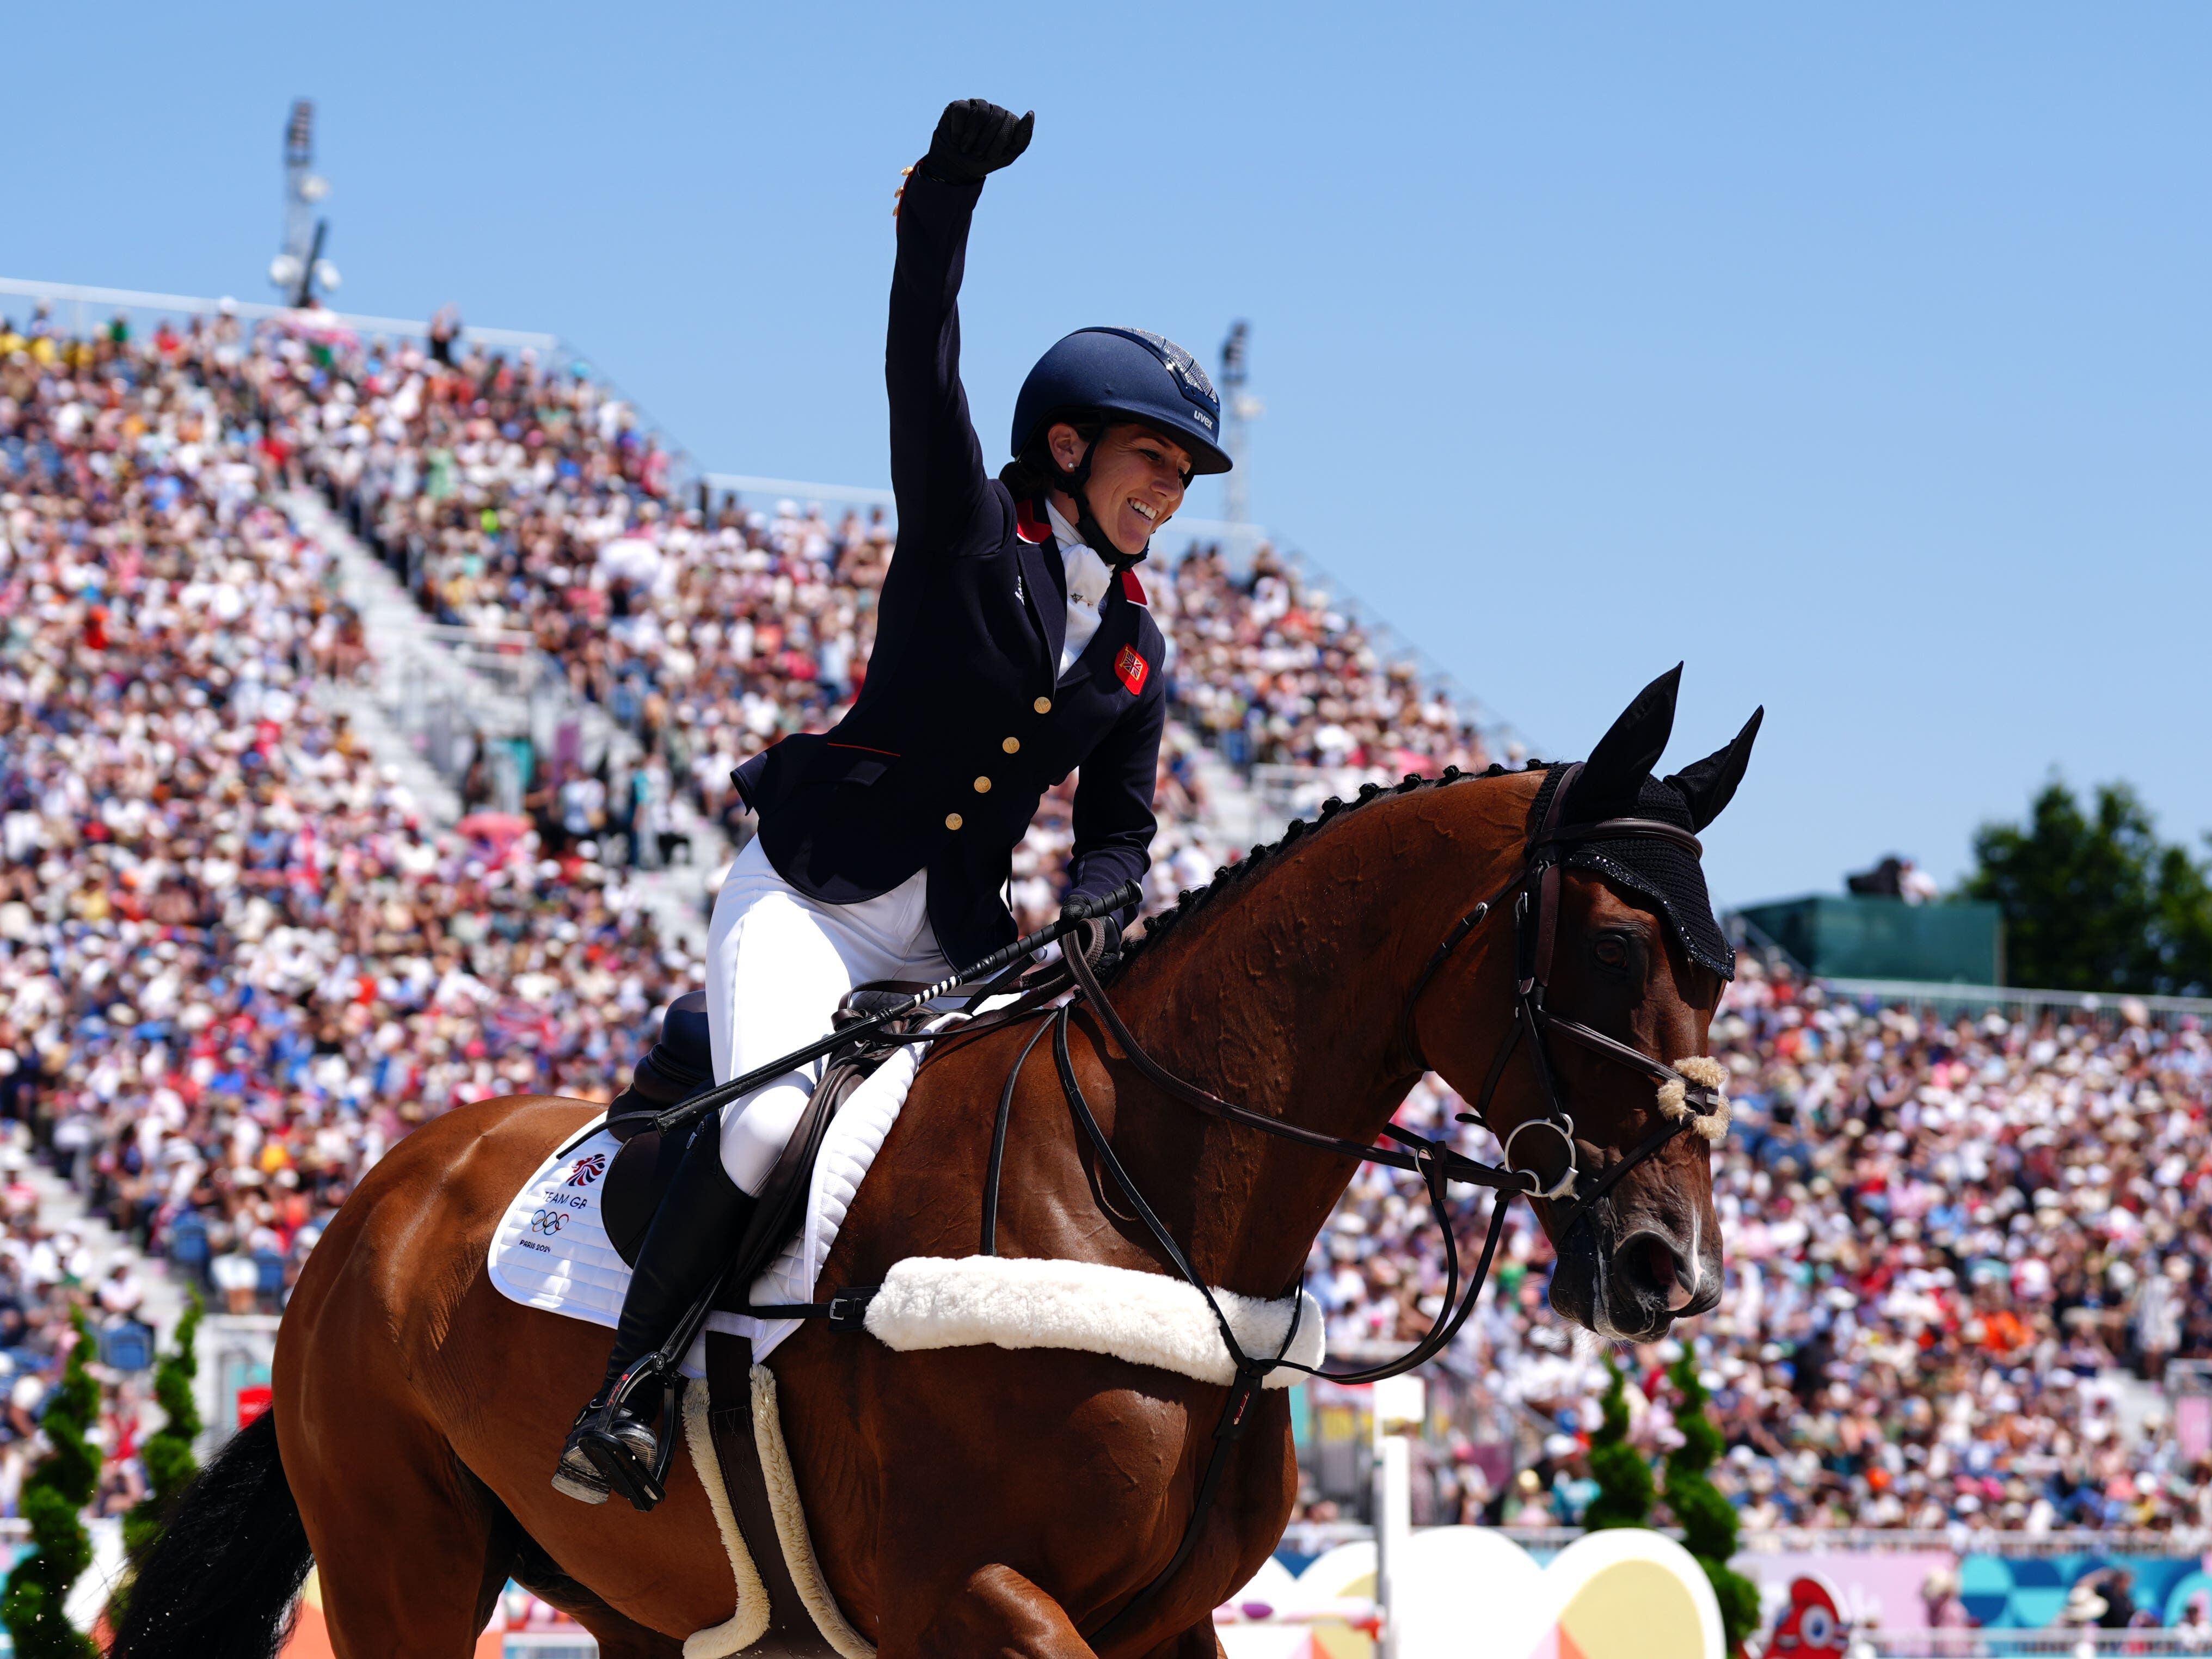 Laura Collett ‘on top of the world’ after clinching GB team eventing gold